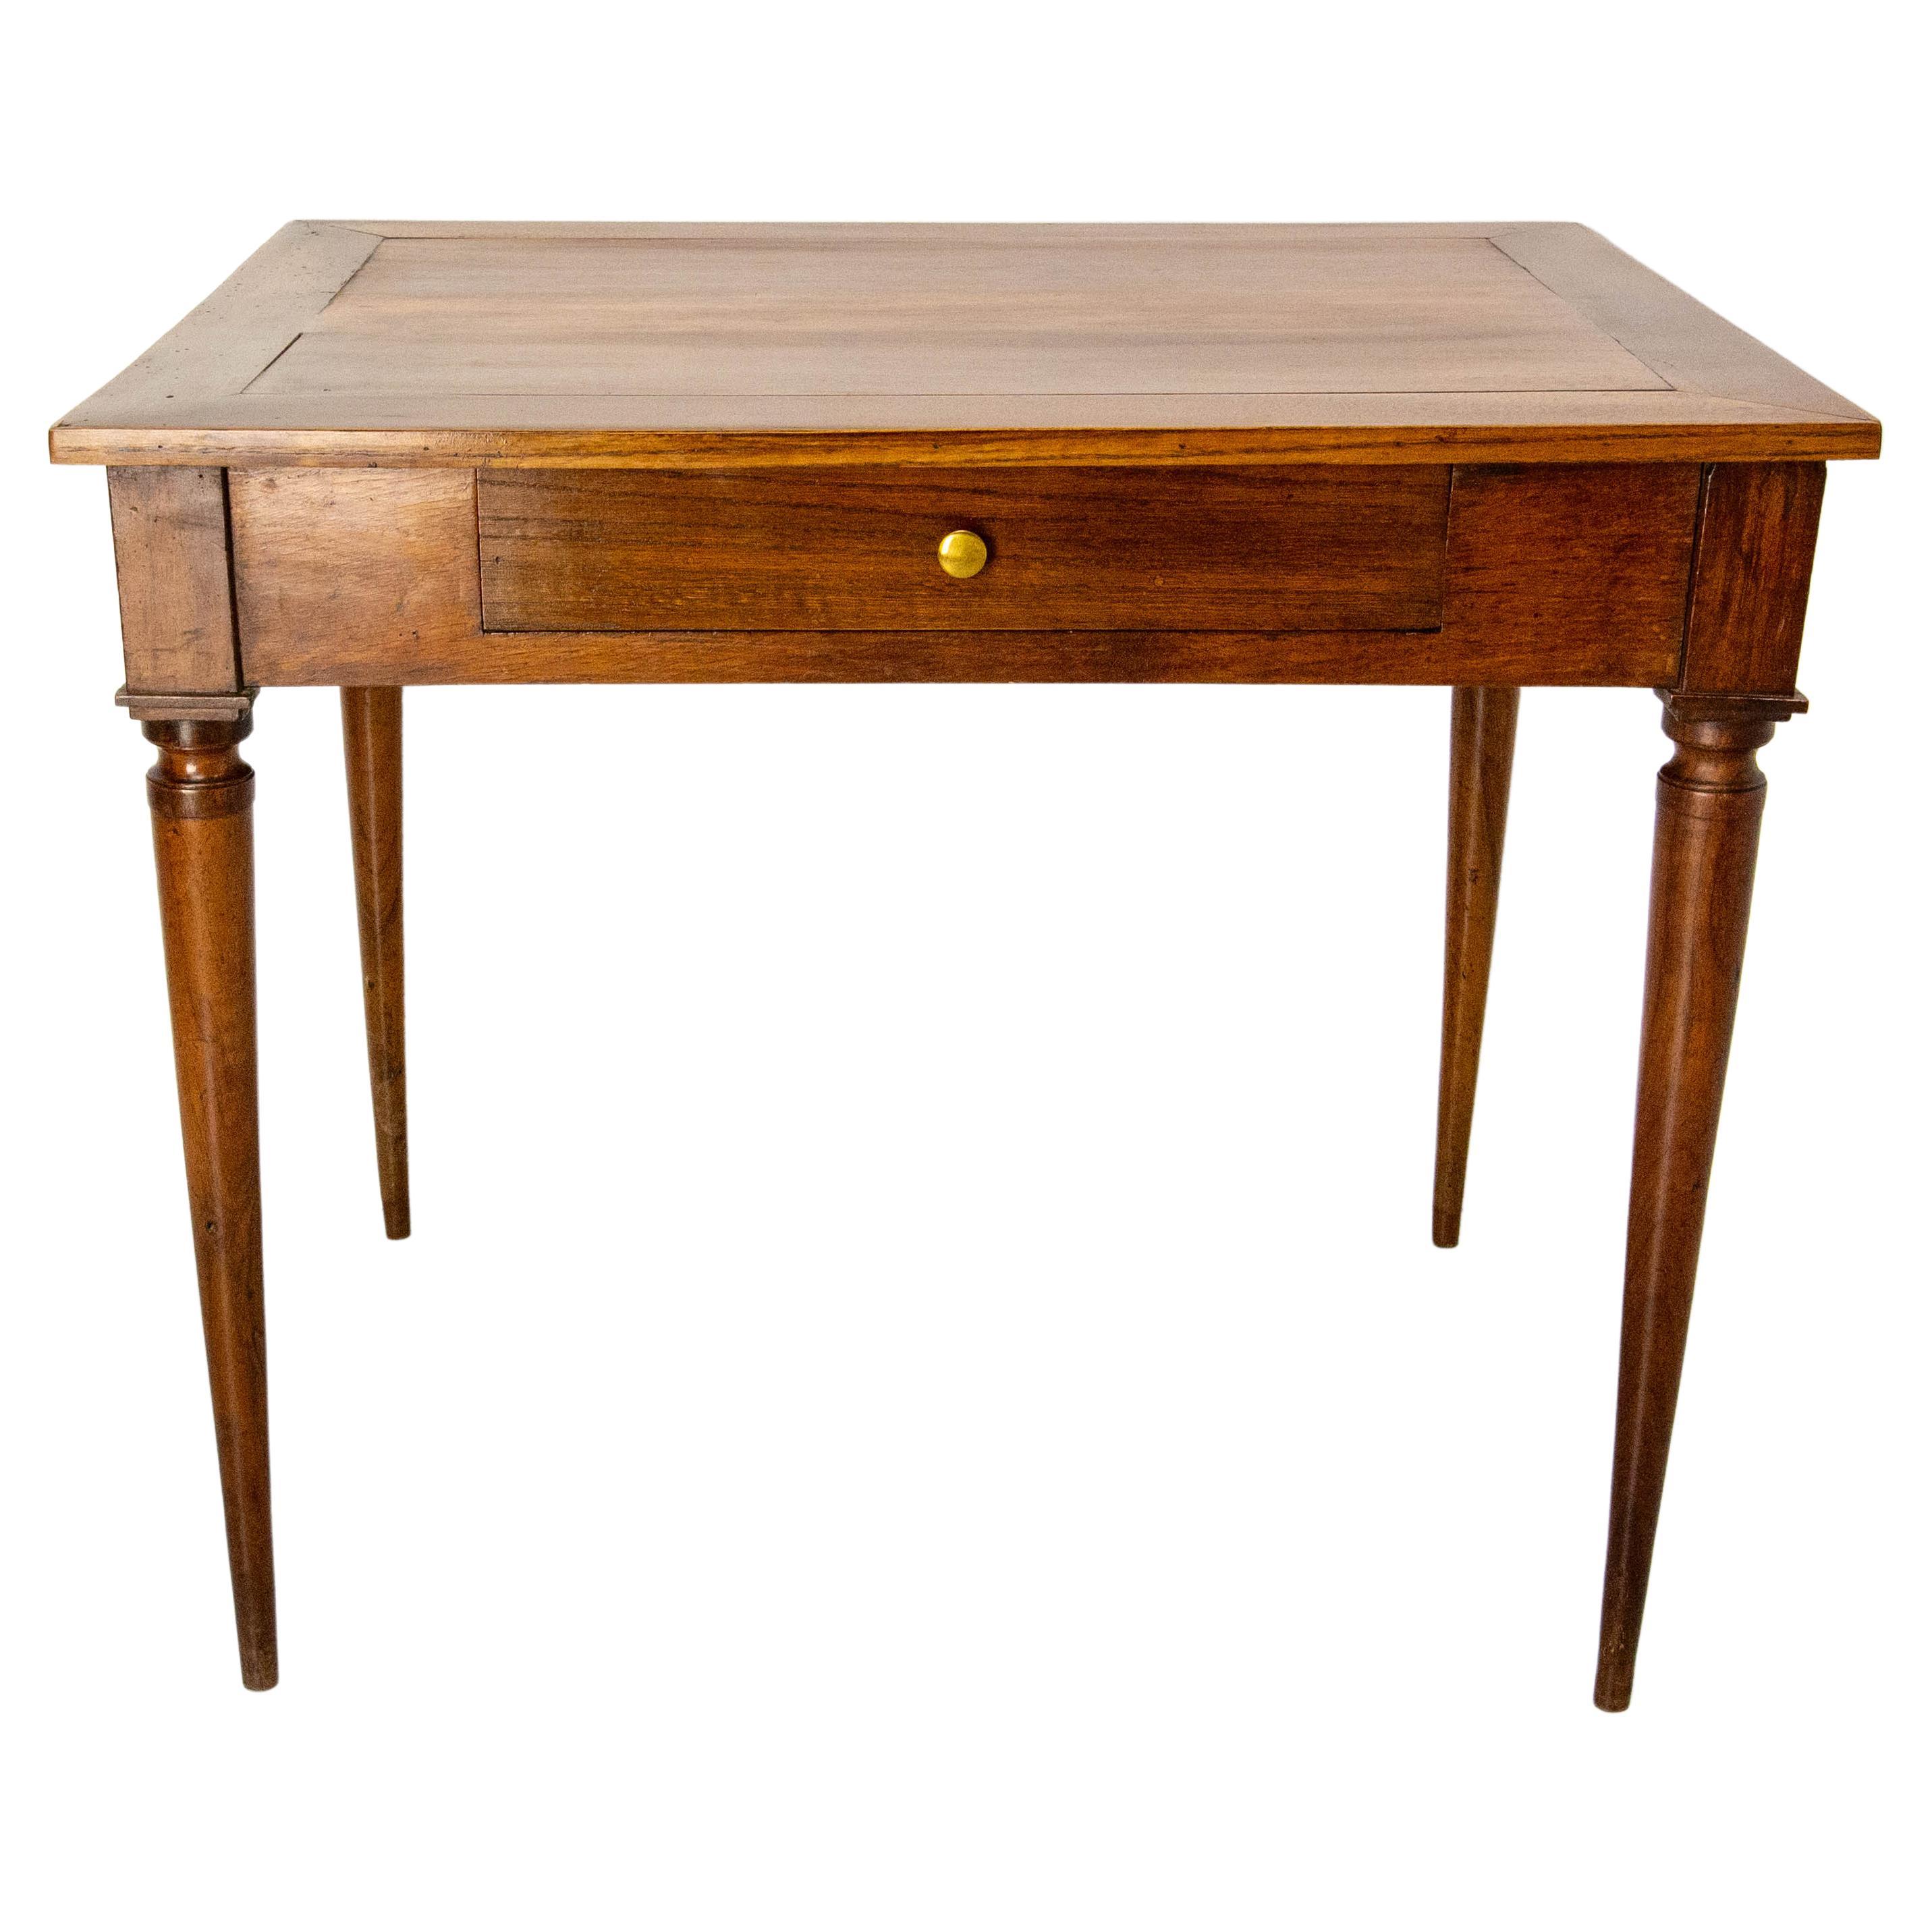 French Directoire Walnut Desk Writing Table One Drawer, 19th Century